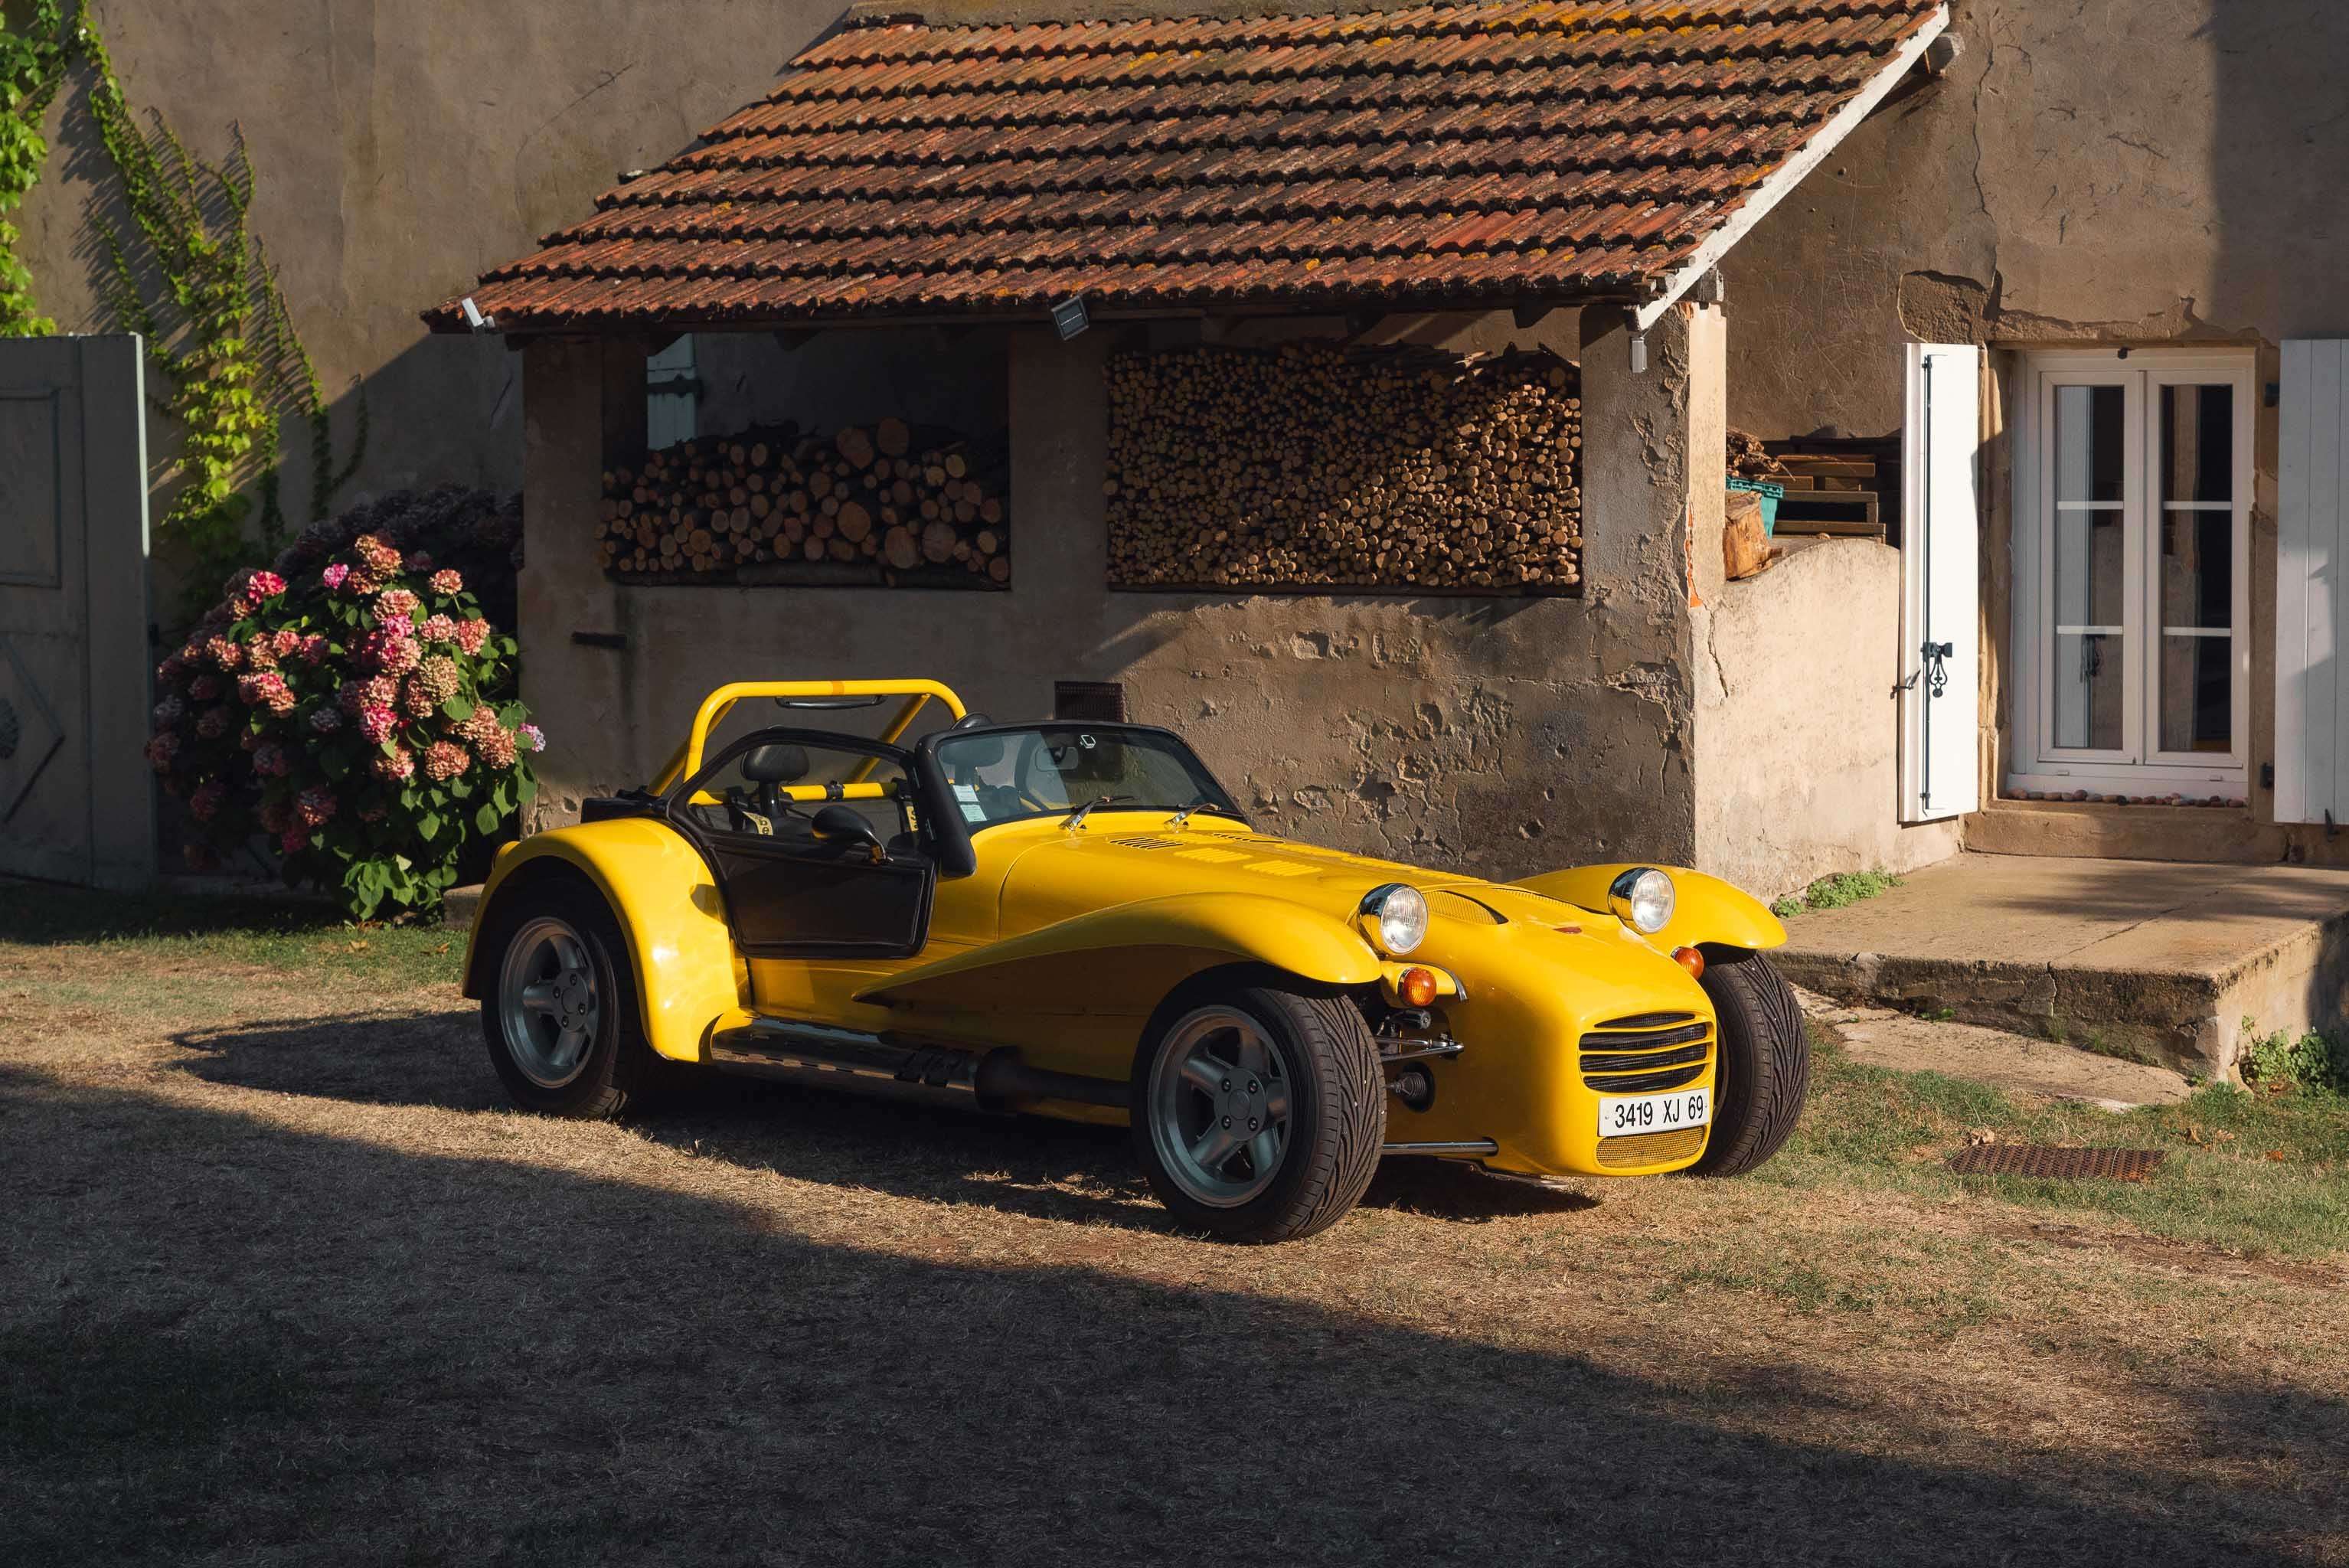 Donkervoort D8 Convertible in Yellow used in Aix-en-Provence for € 57,000.-